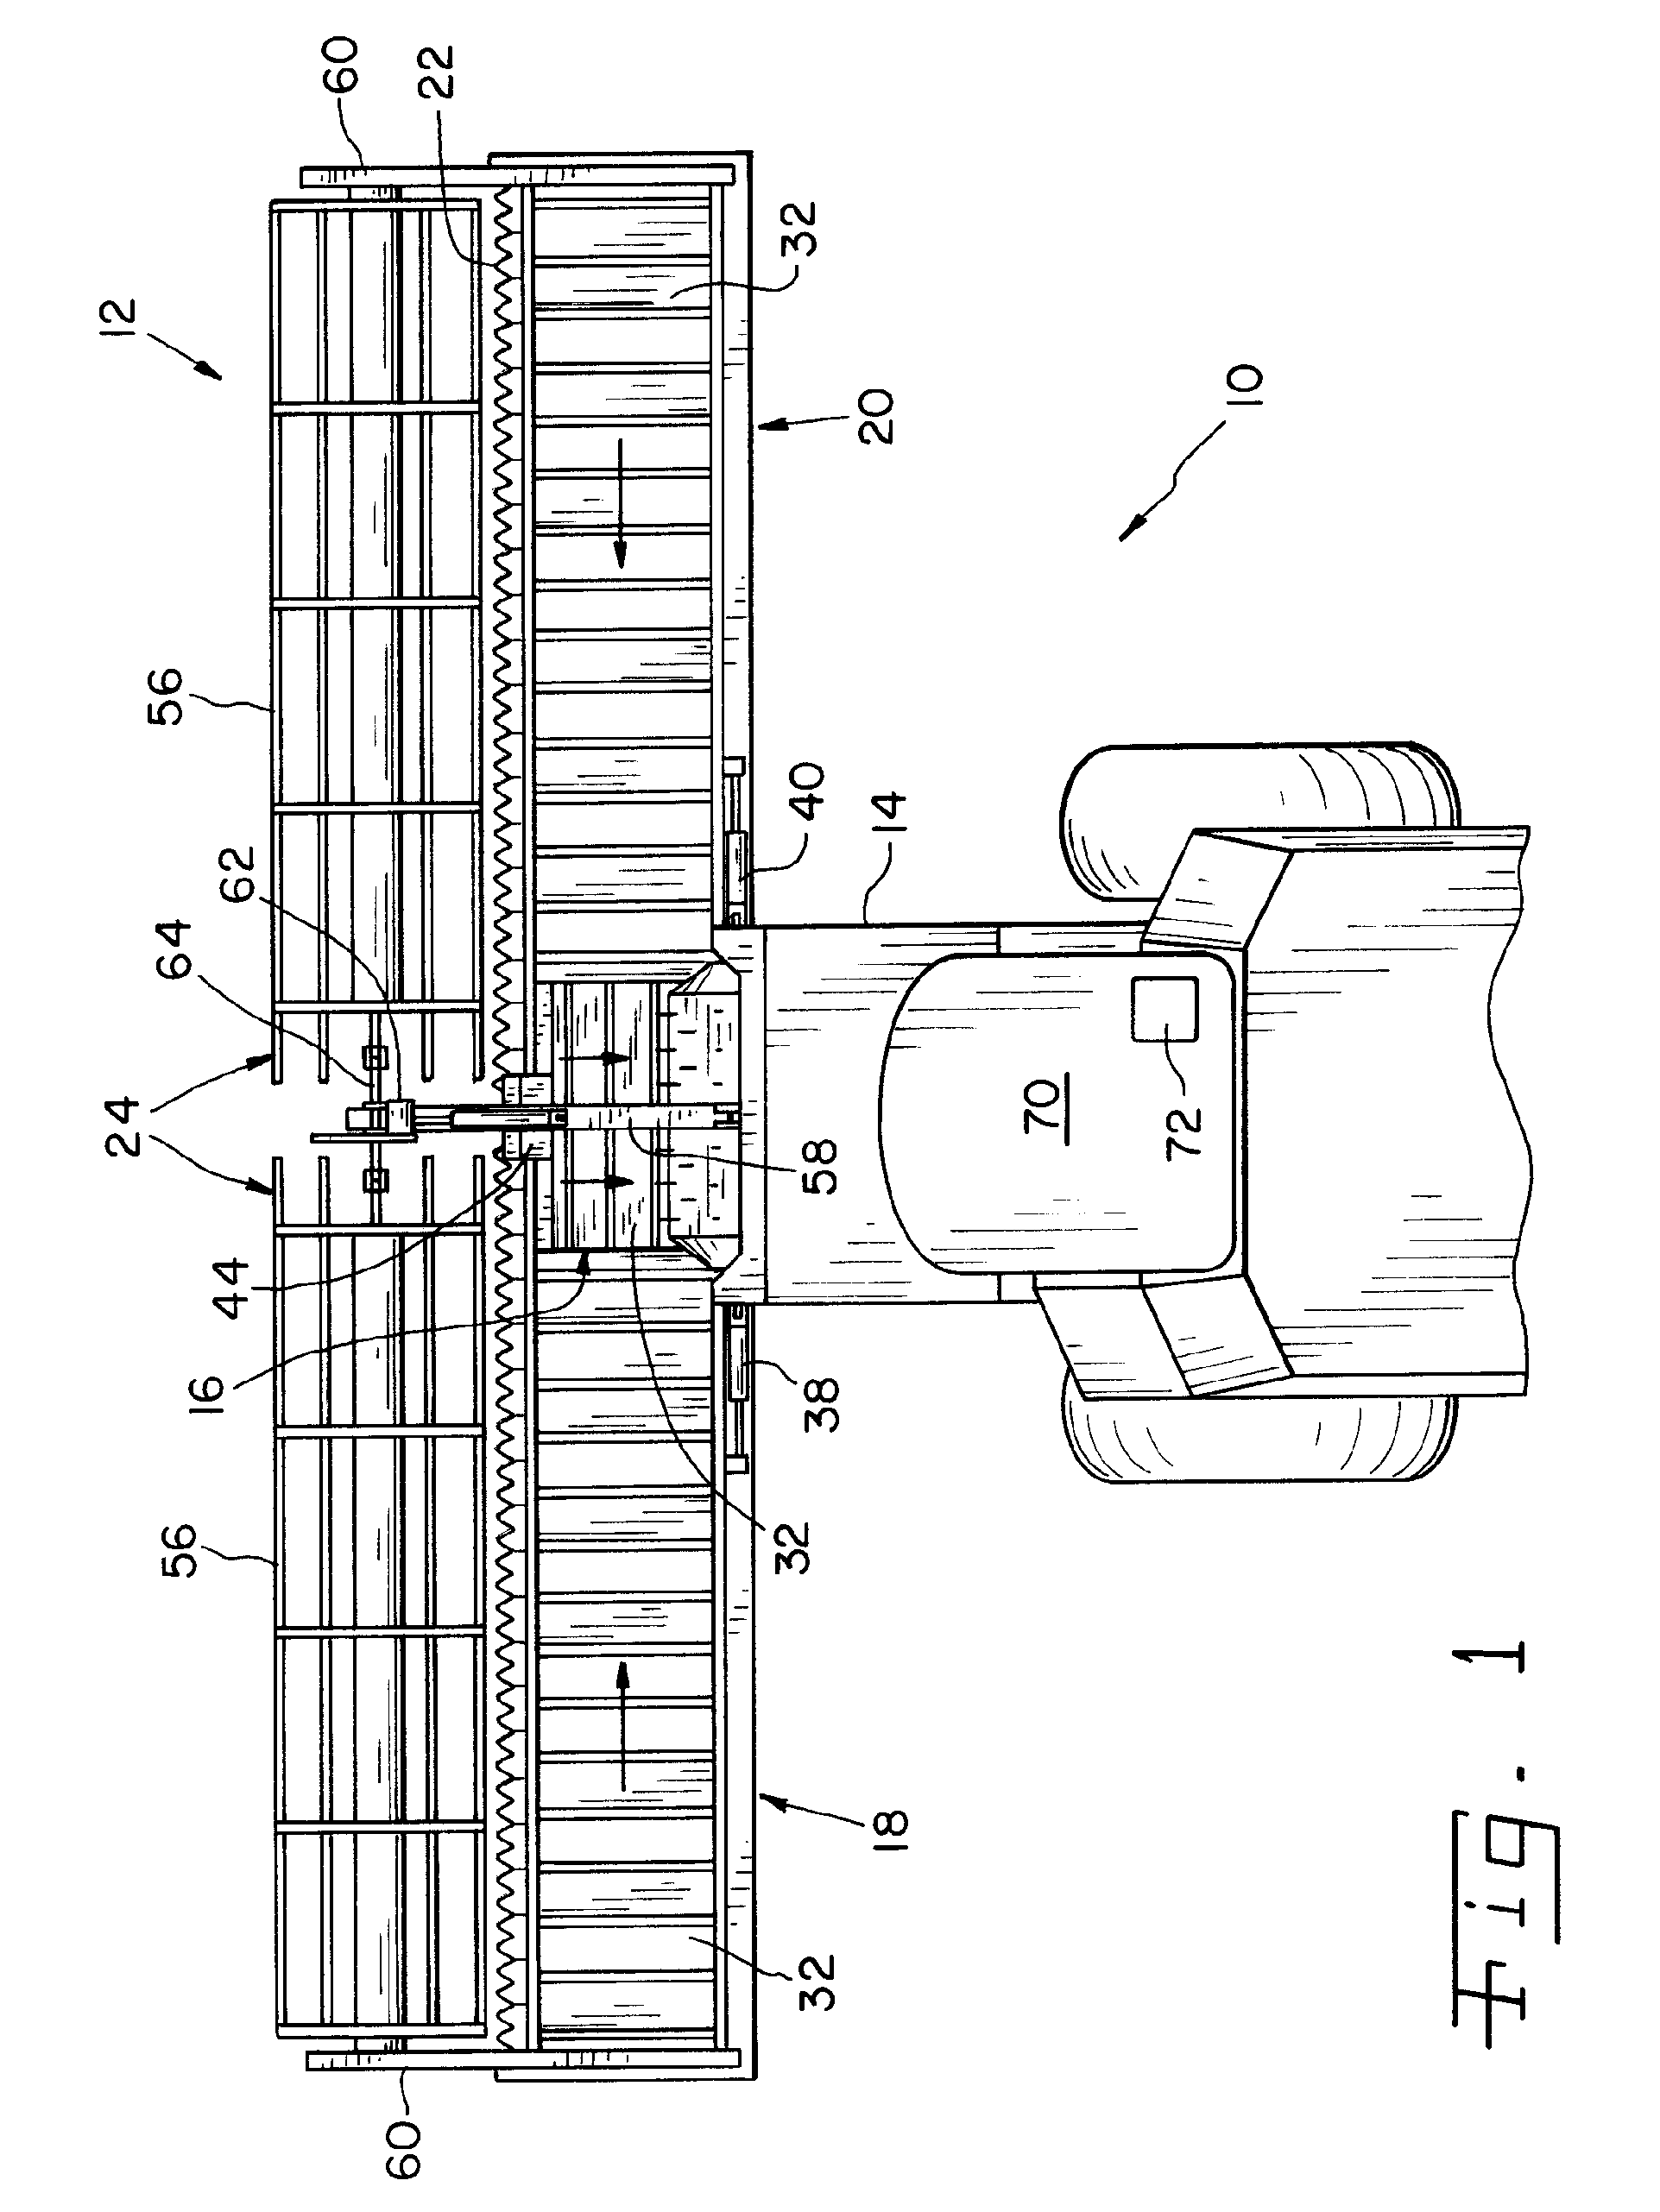 Integrated draper belt support and skid shoe in an agricultural harvesting machine